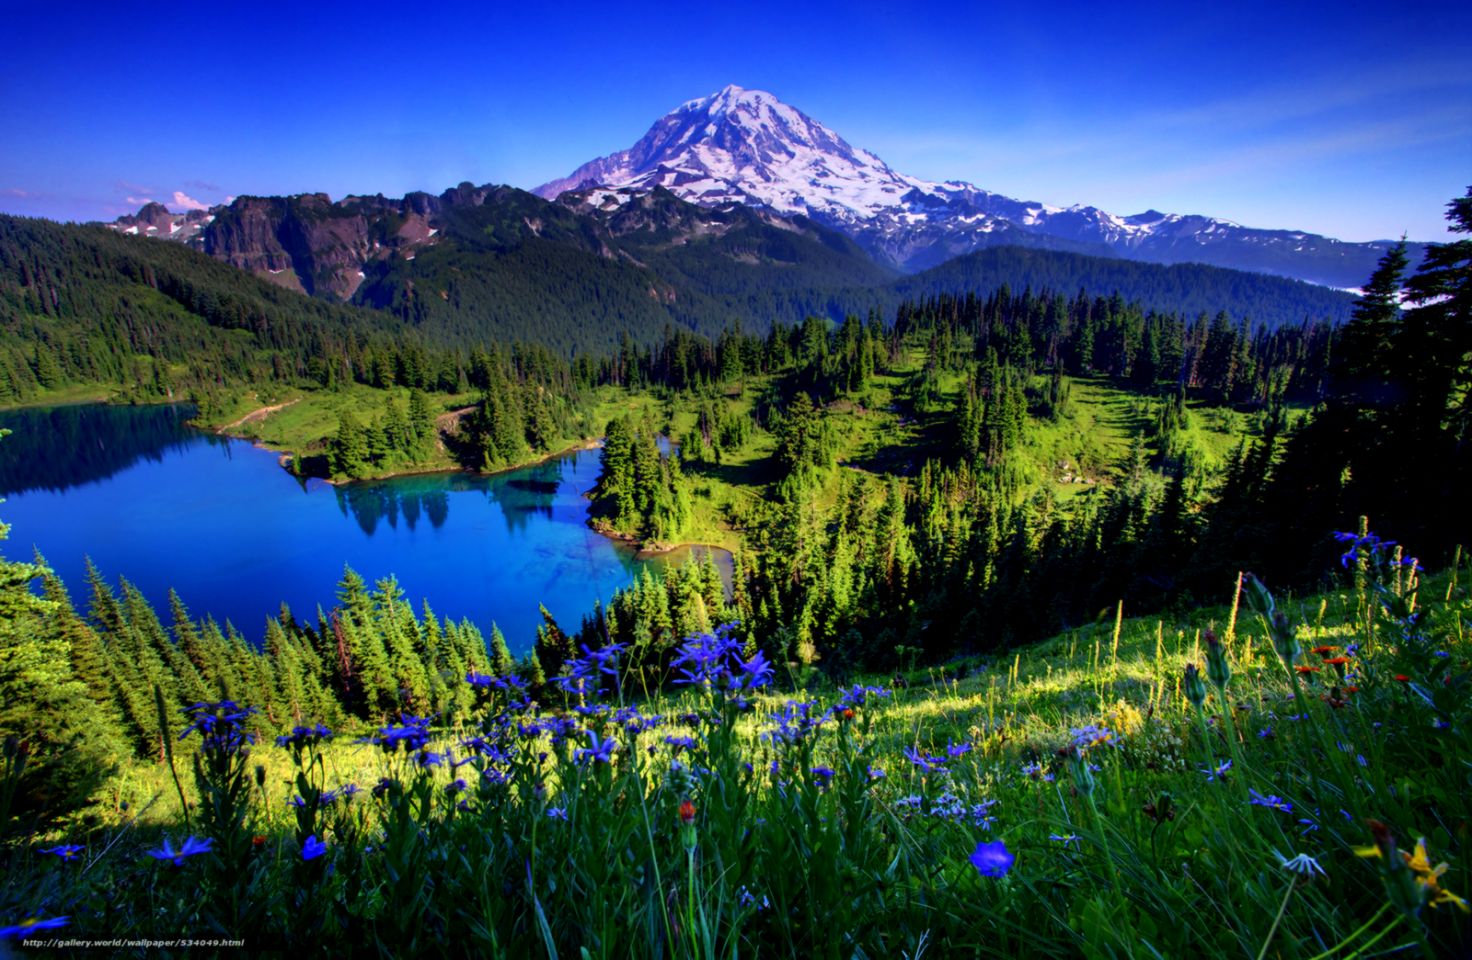 Mount Rainer National Park Wallpaper Android